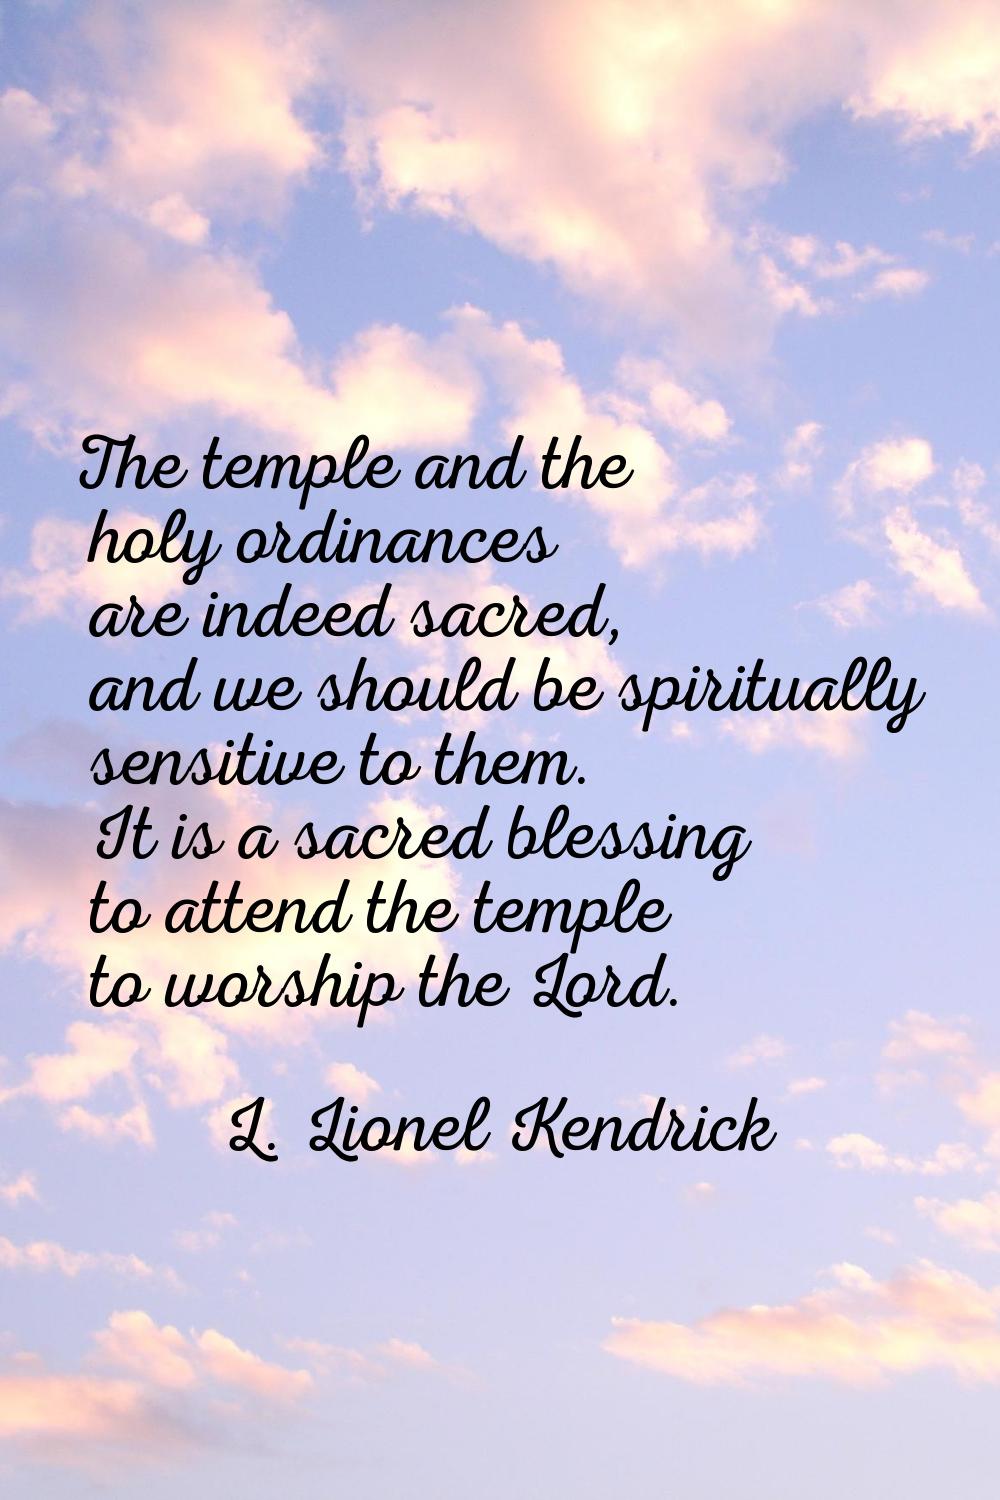 The temple and the holy ordinances are indeed sacred, and we should be spiritually sensitive to the